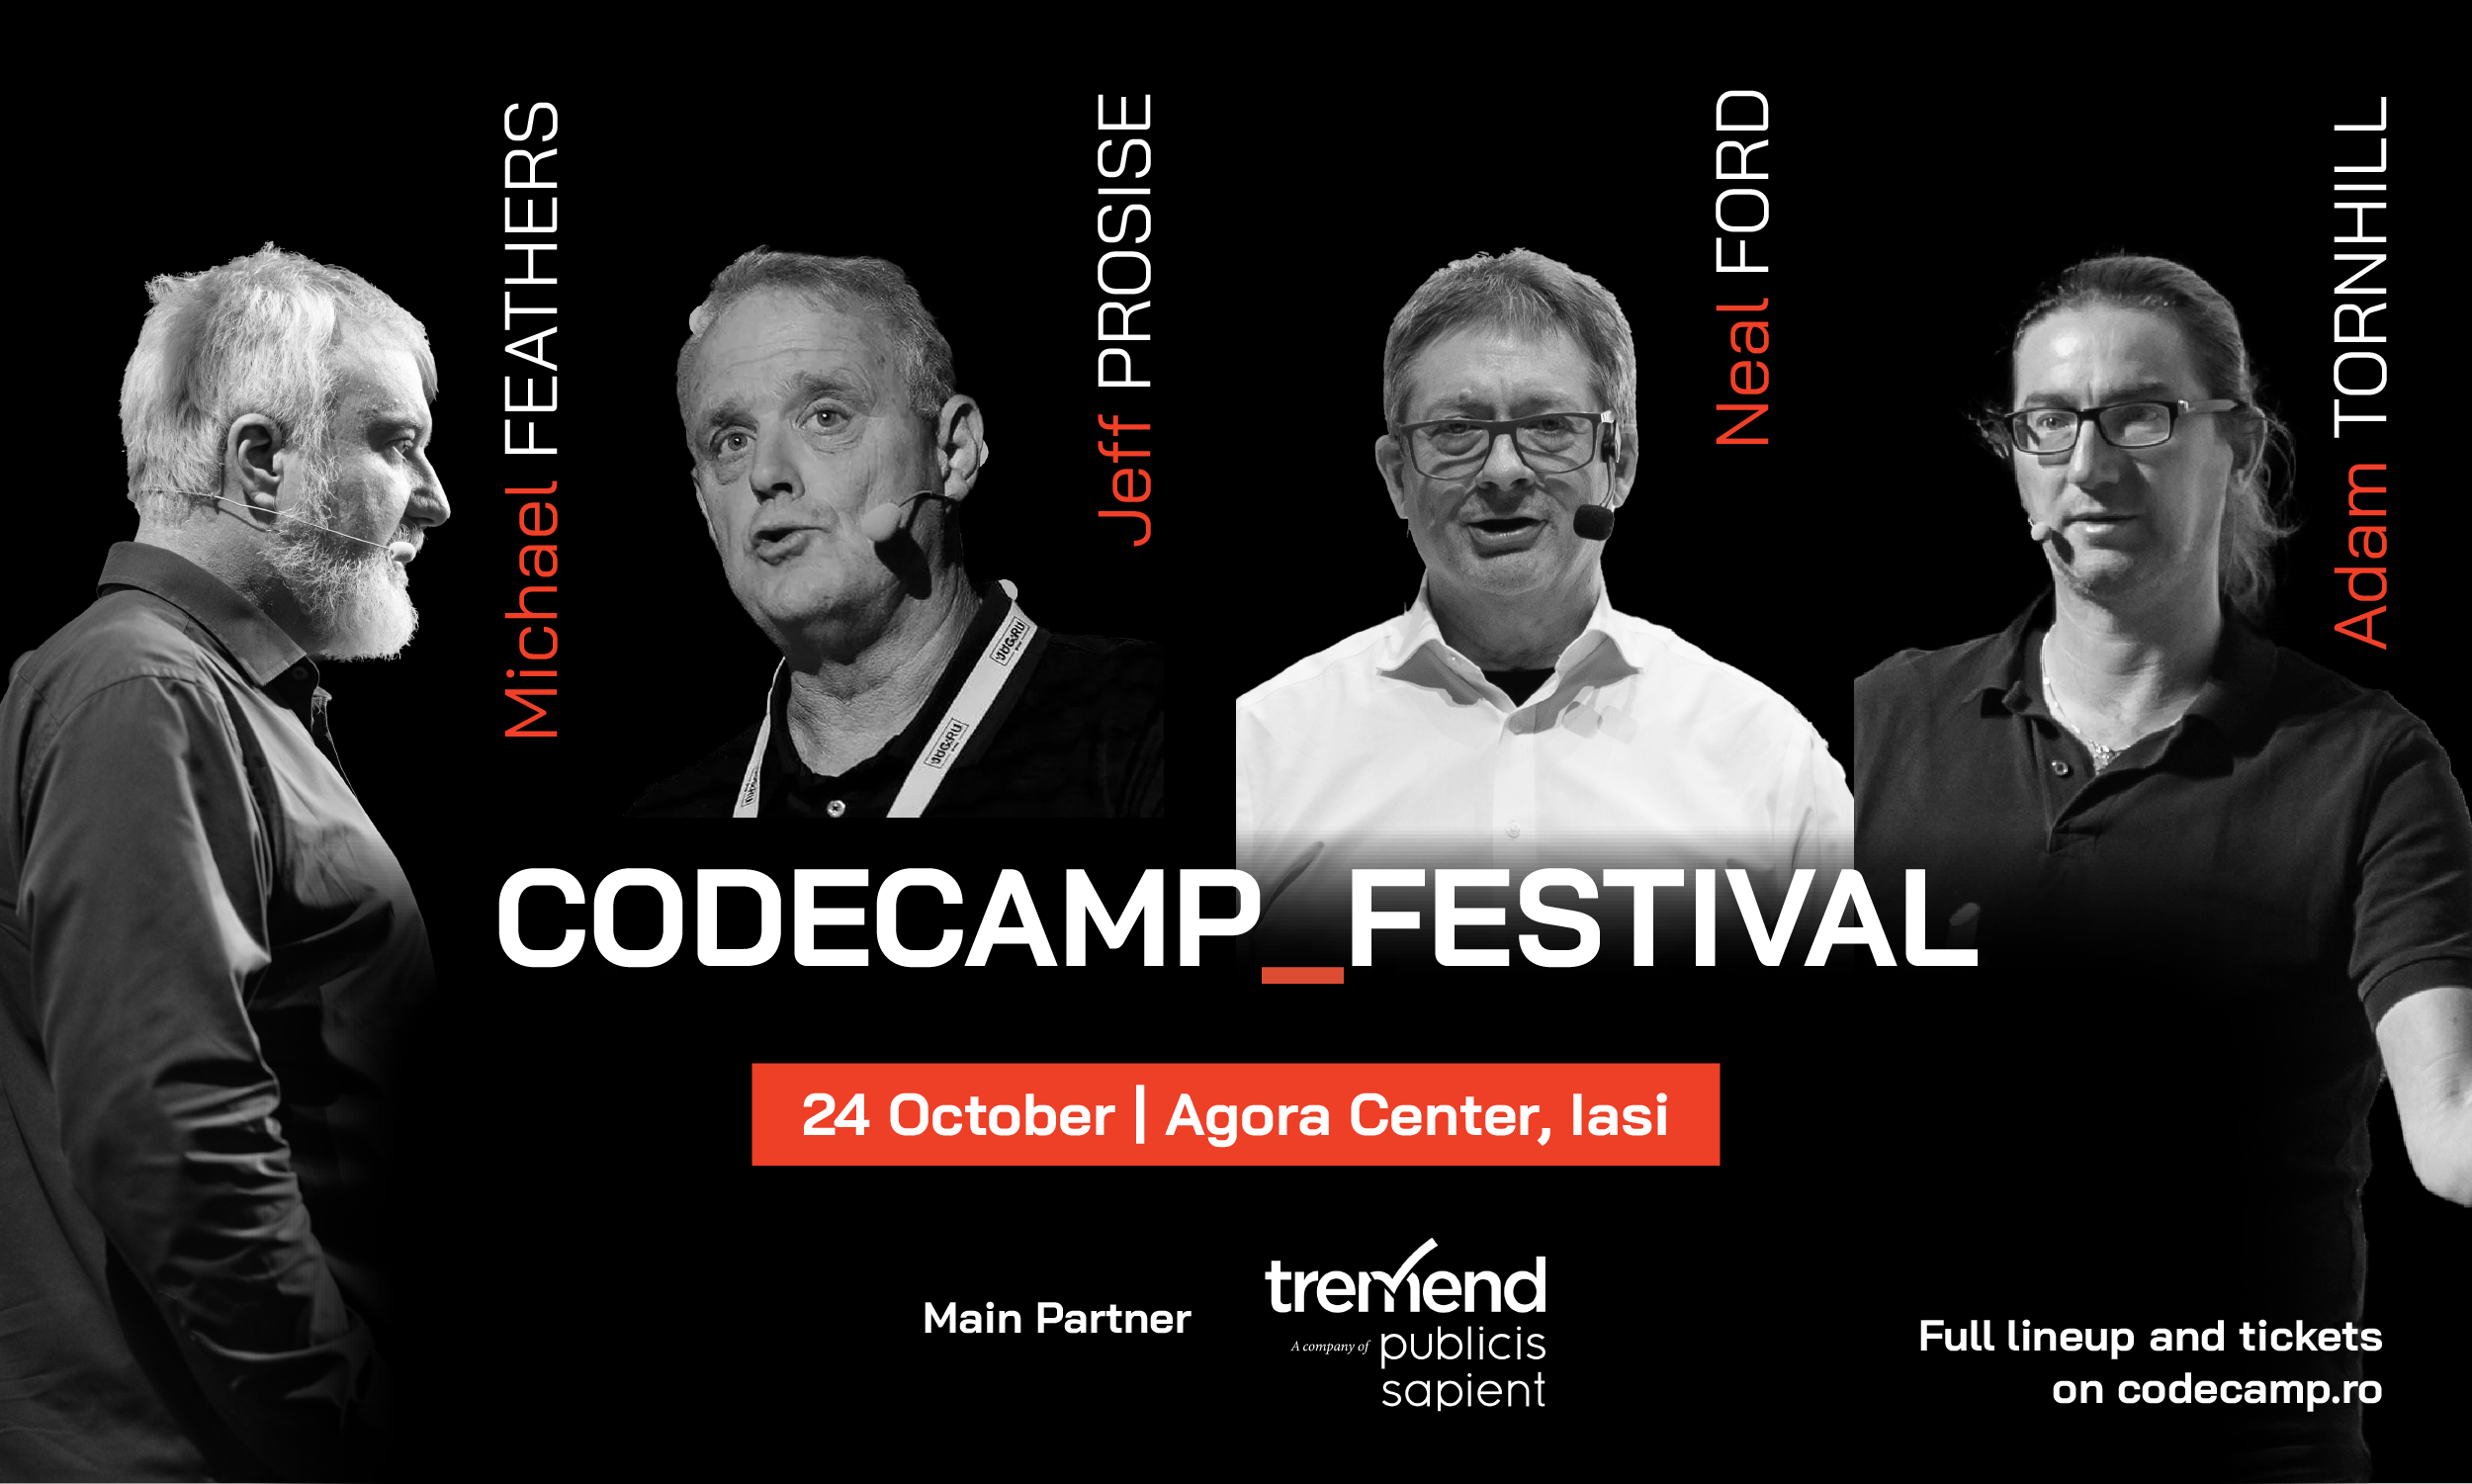 Codecamp festival on how about tech